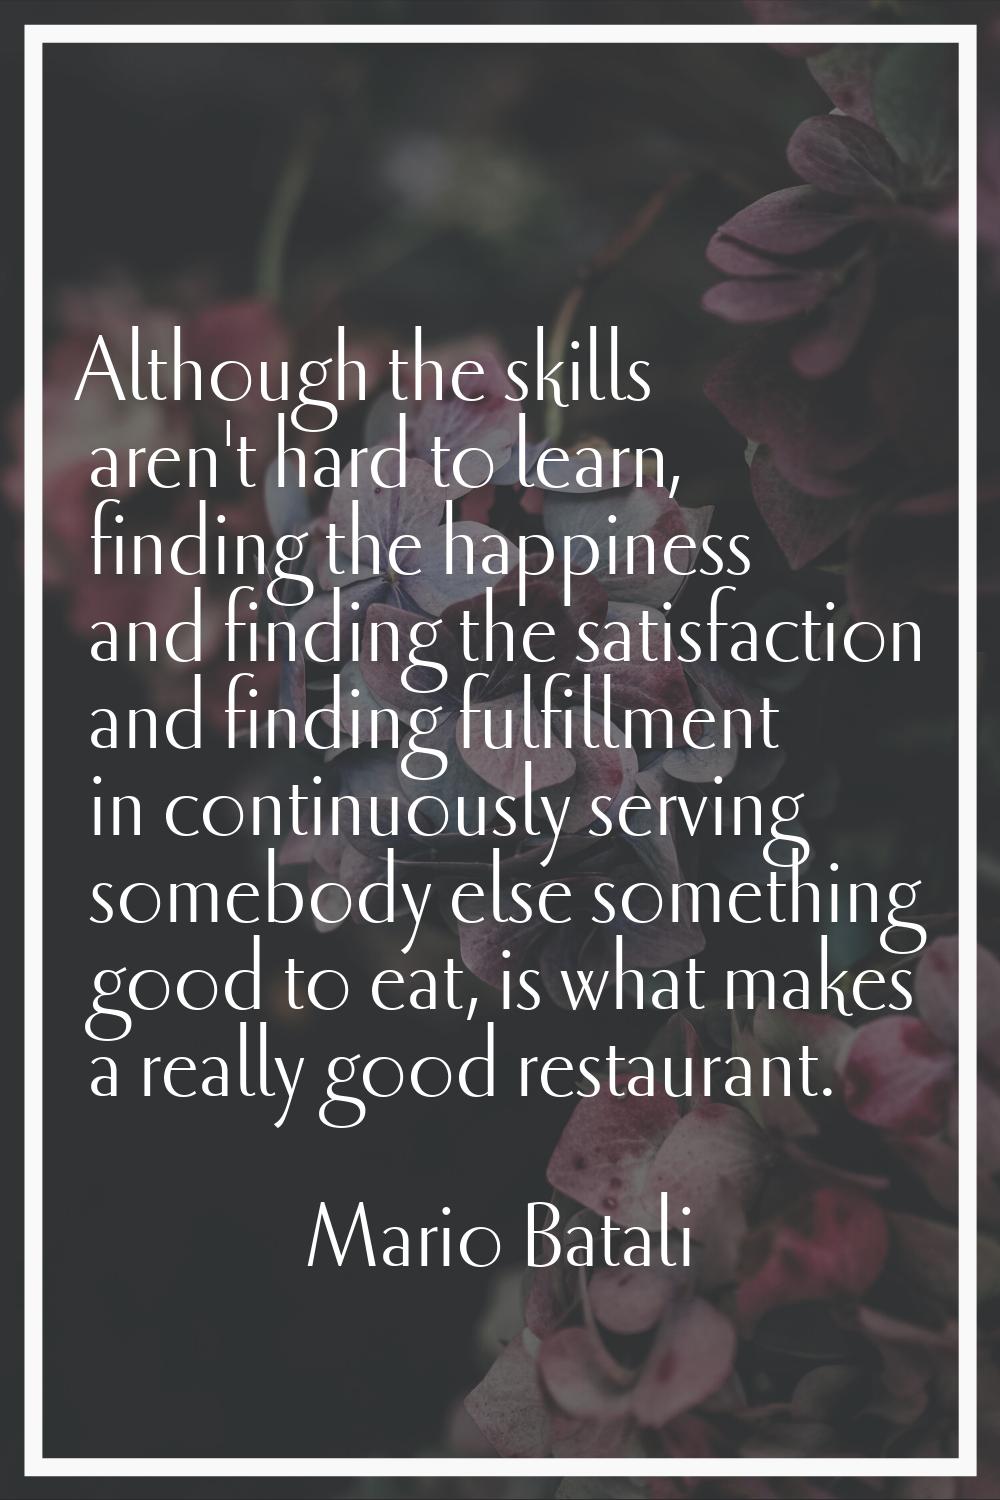 Although the skills aren't hard to learn, finding the happiness and finding the satisfaction and fi